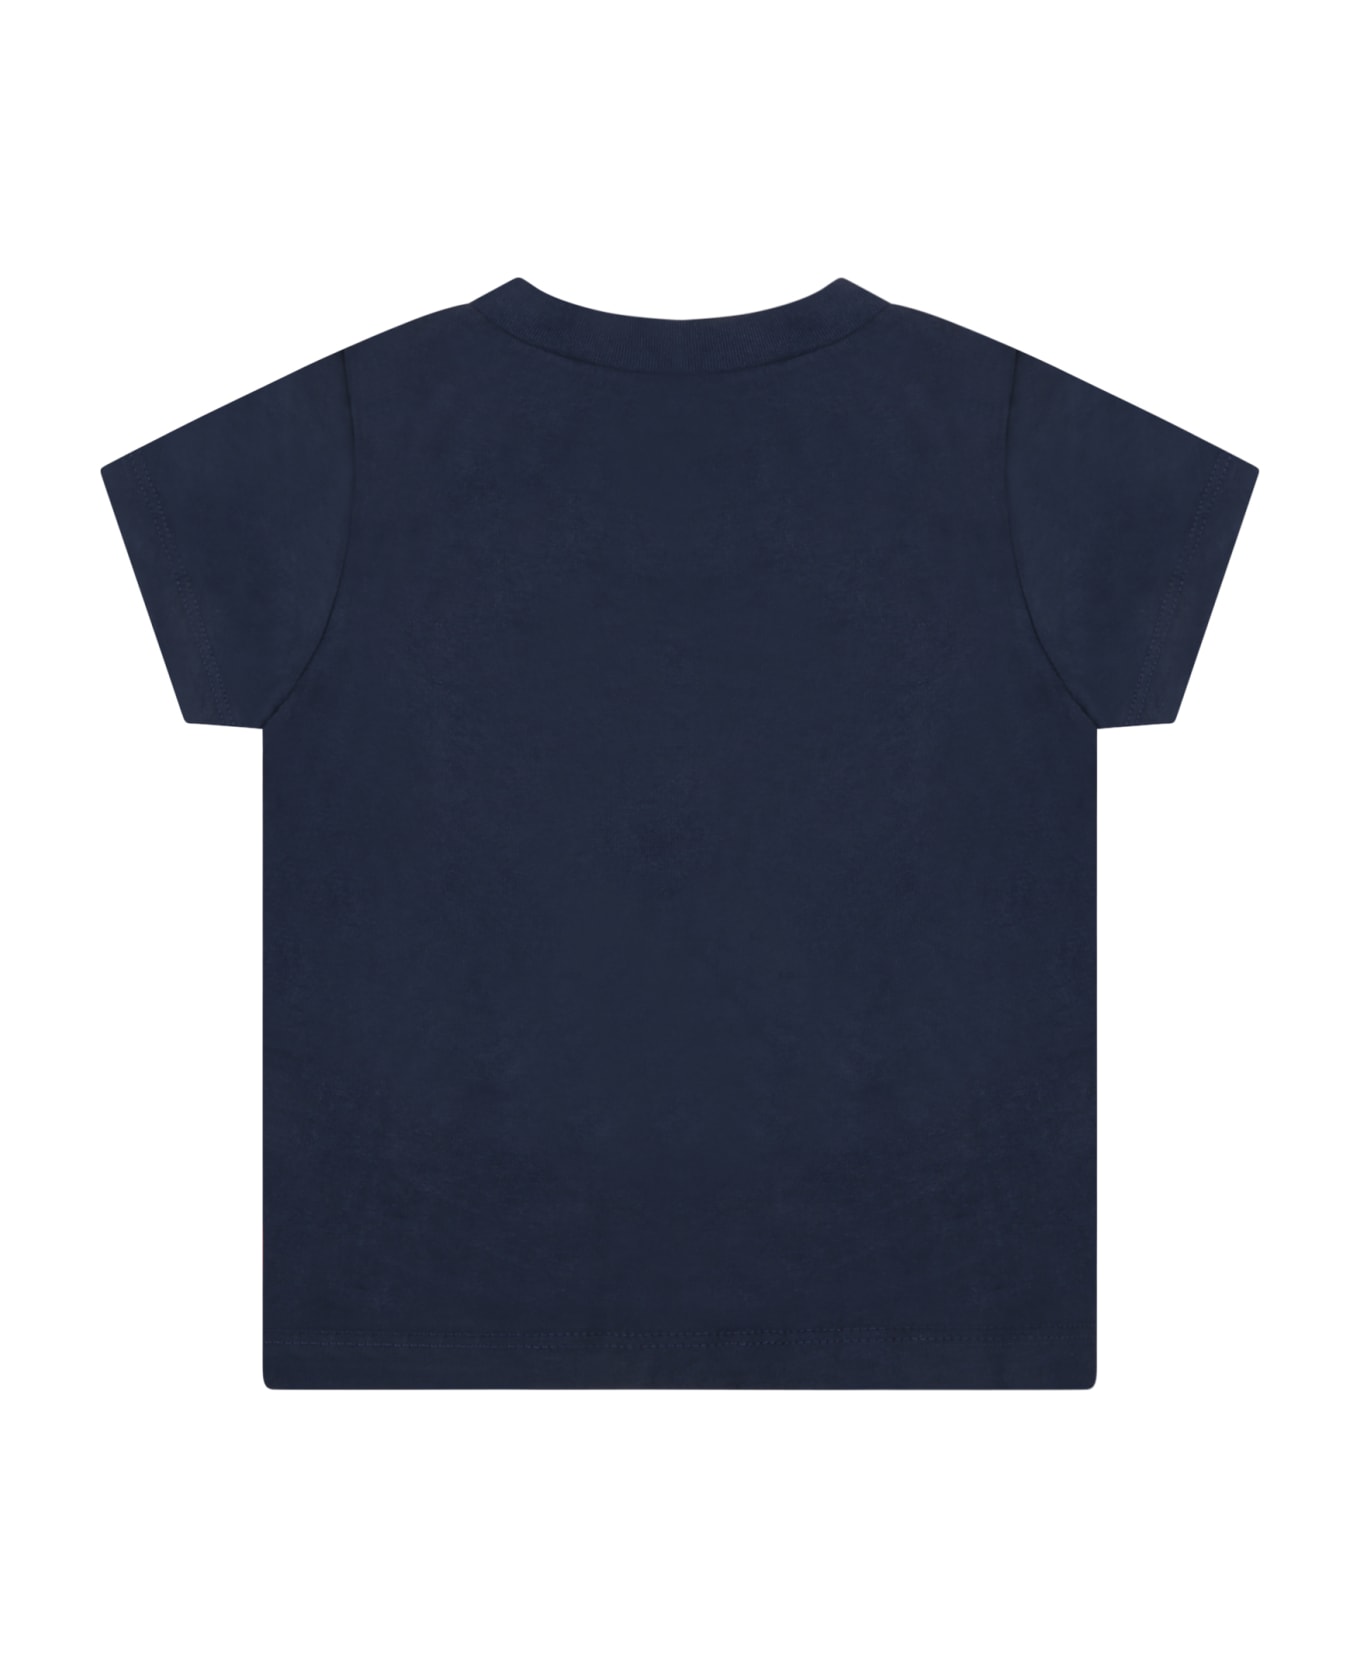 Levi's Blue T-shirt For Babies With Patch Logo - Blue